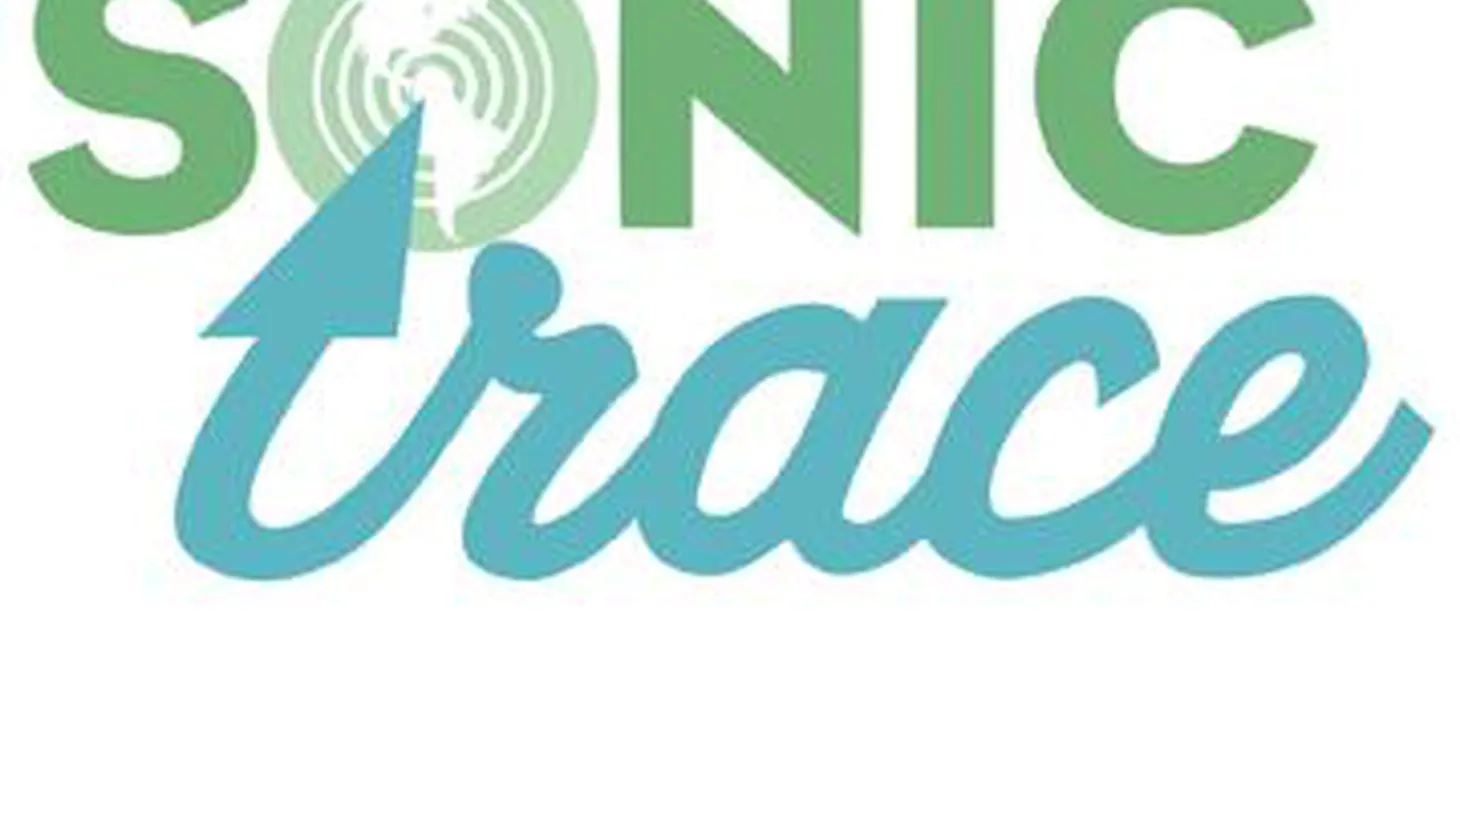 Sonic Trace is KCRW's story-telling project that begins in the heart of Los Angeles and crosses into Mexico and across Latin America.